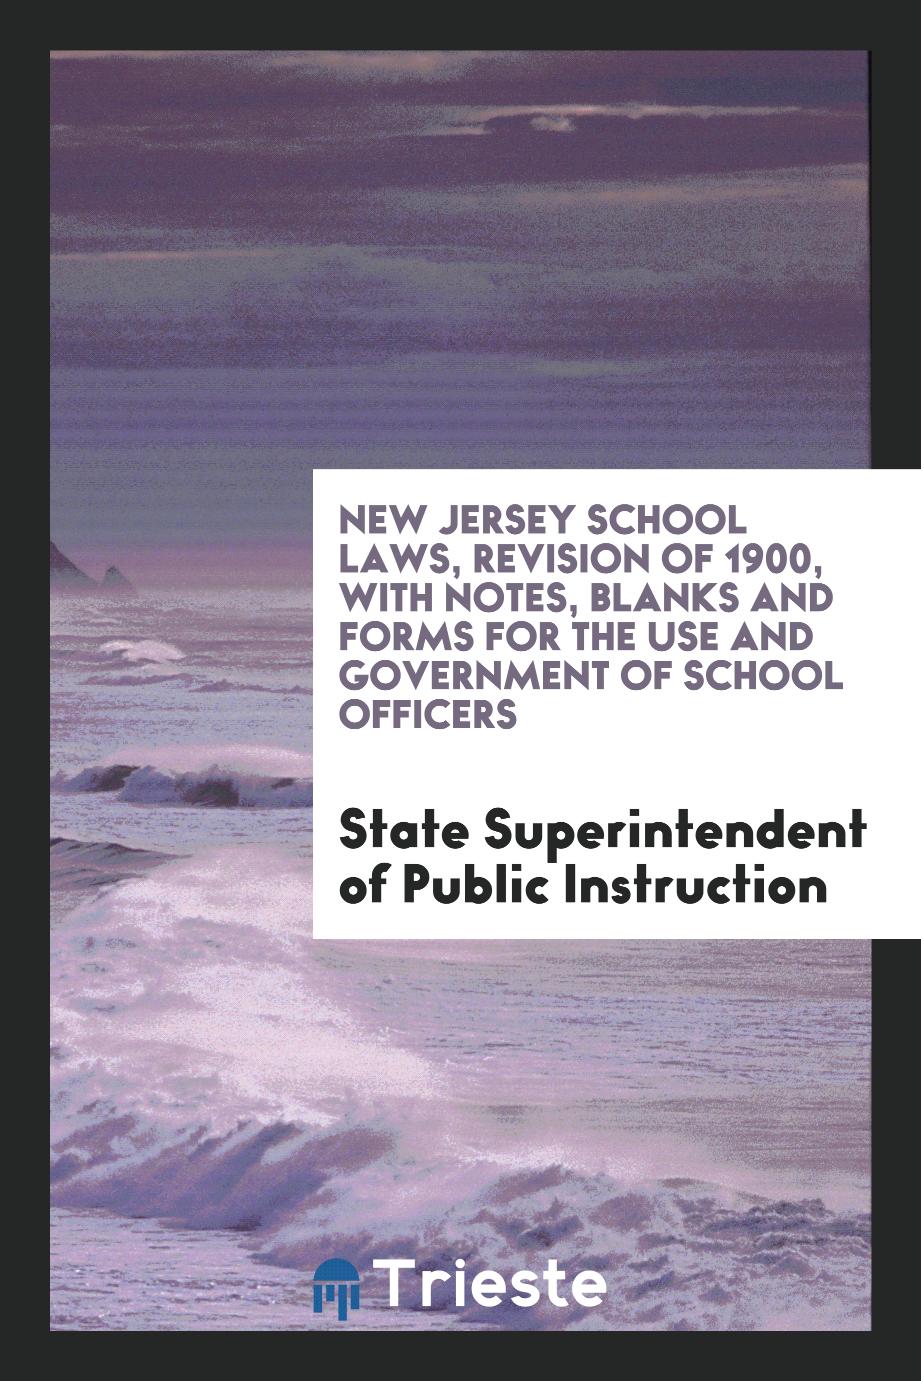 New Jersey School Laws, Revision of 1900, with Notes, Blanks and Forms for the Use and Government of School Officers